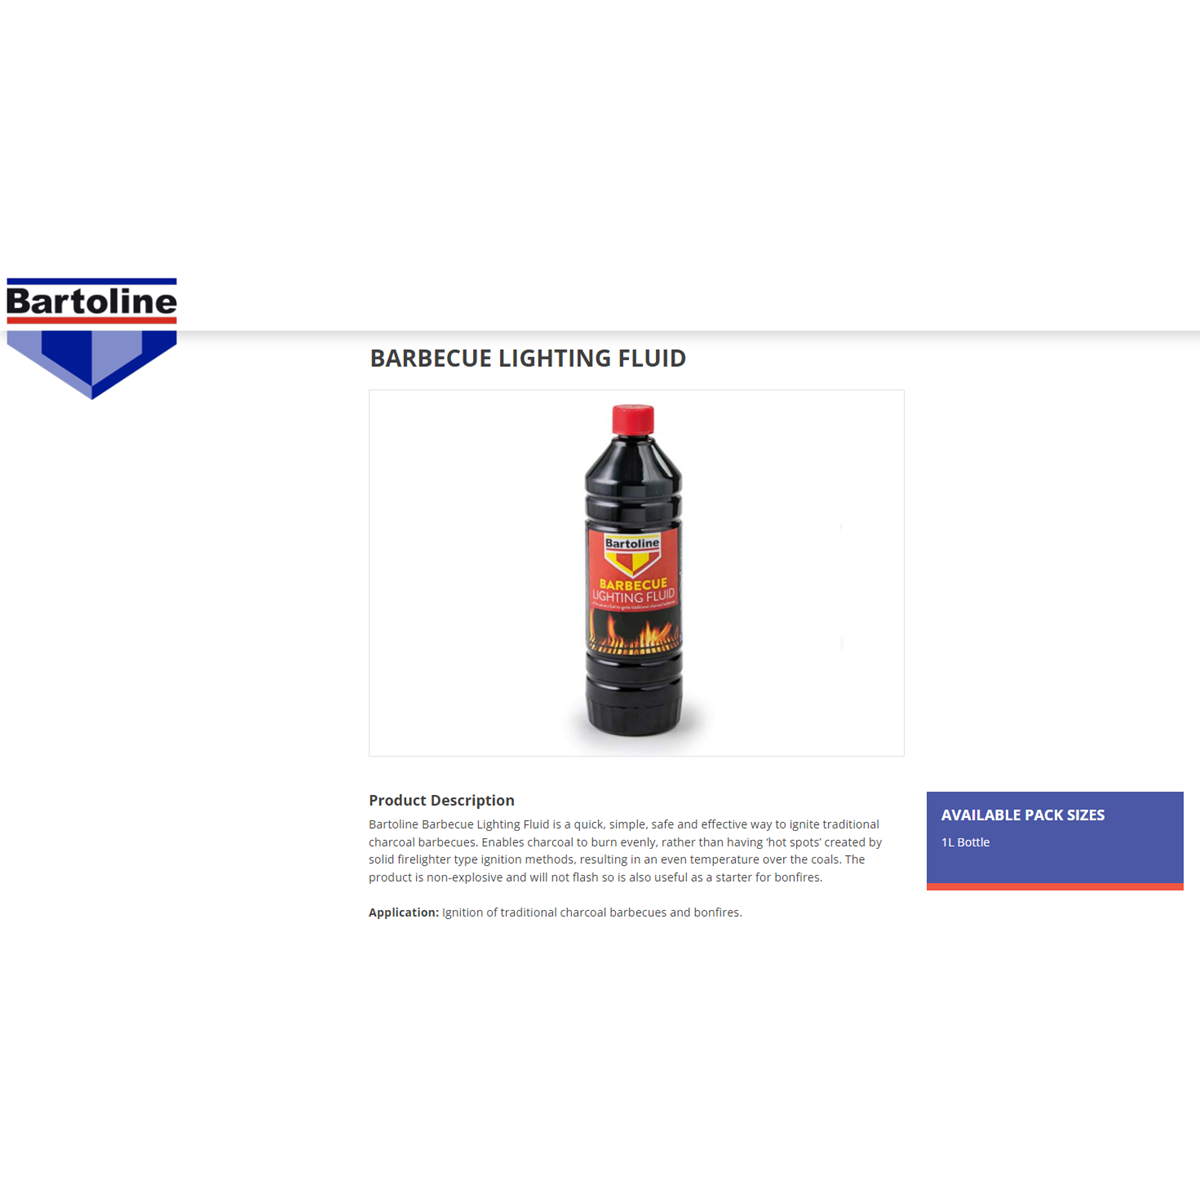 Where to Buy Barbecue Lighting Fluid